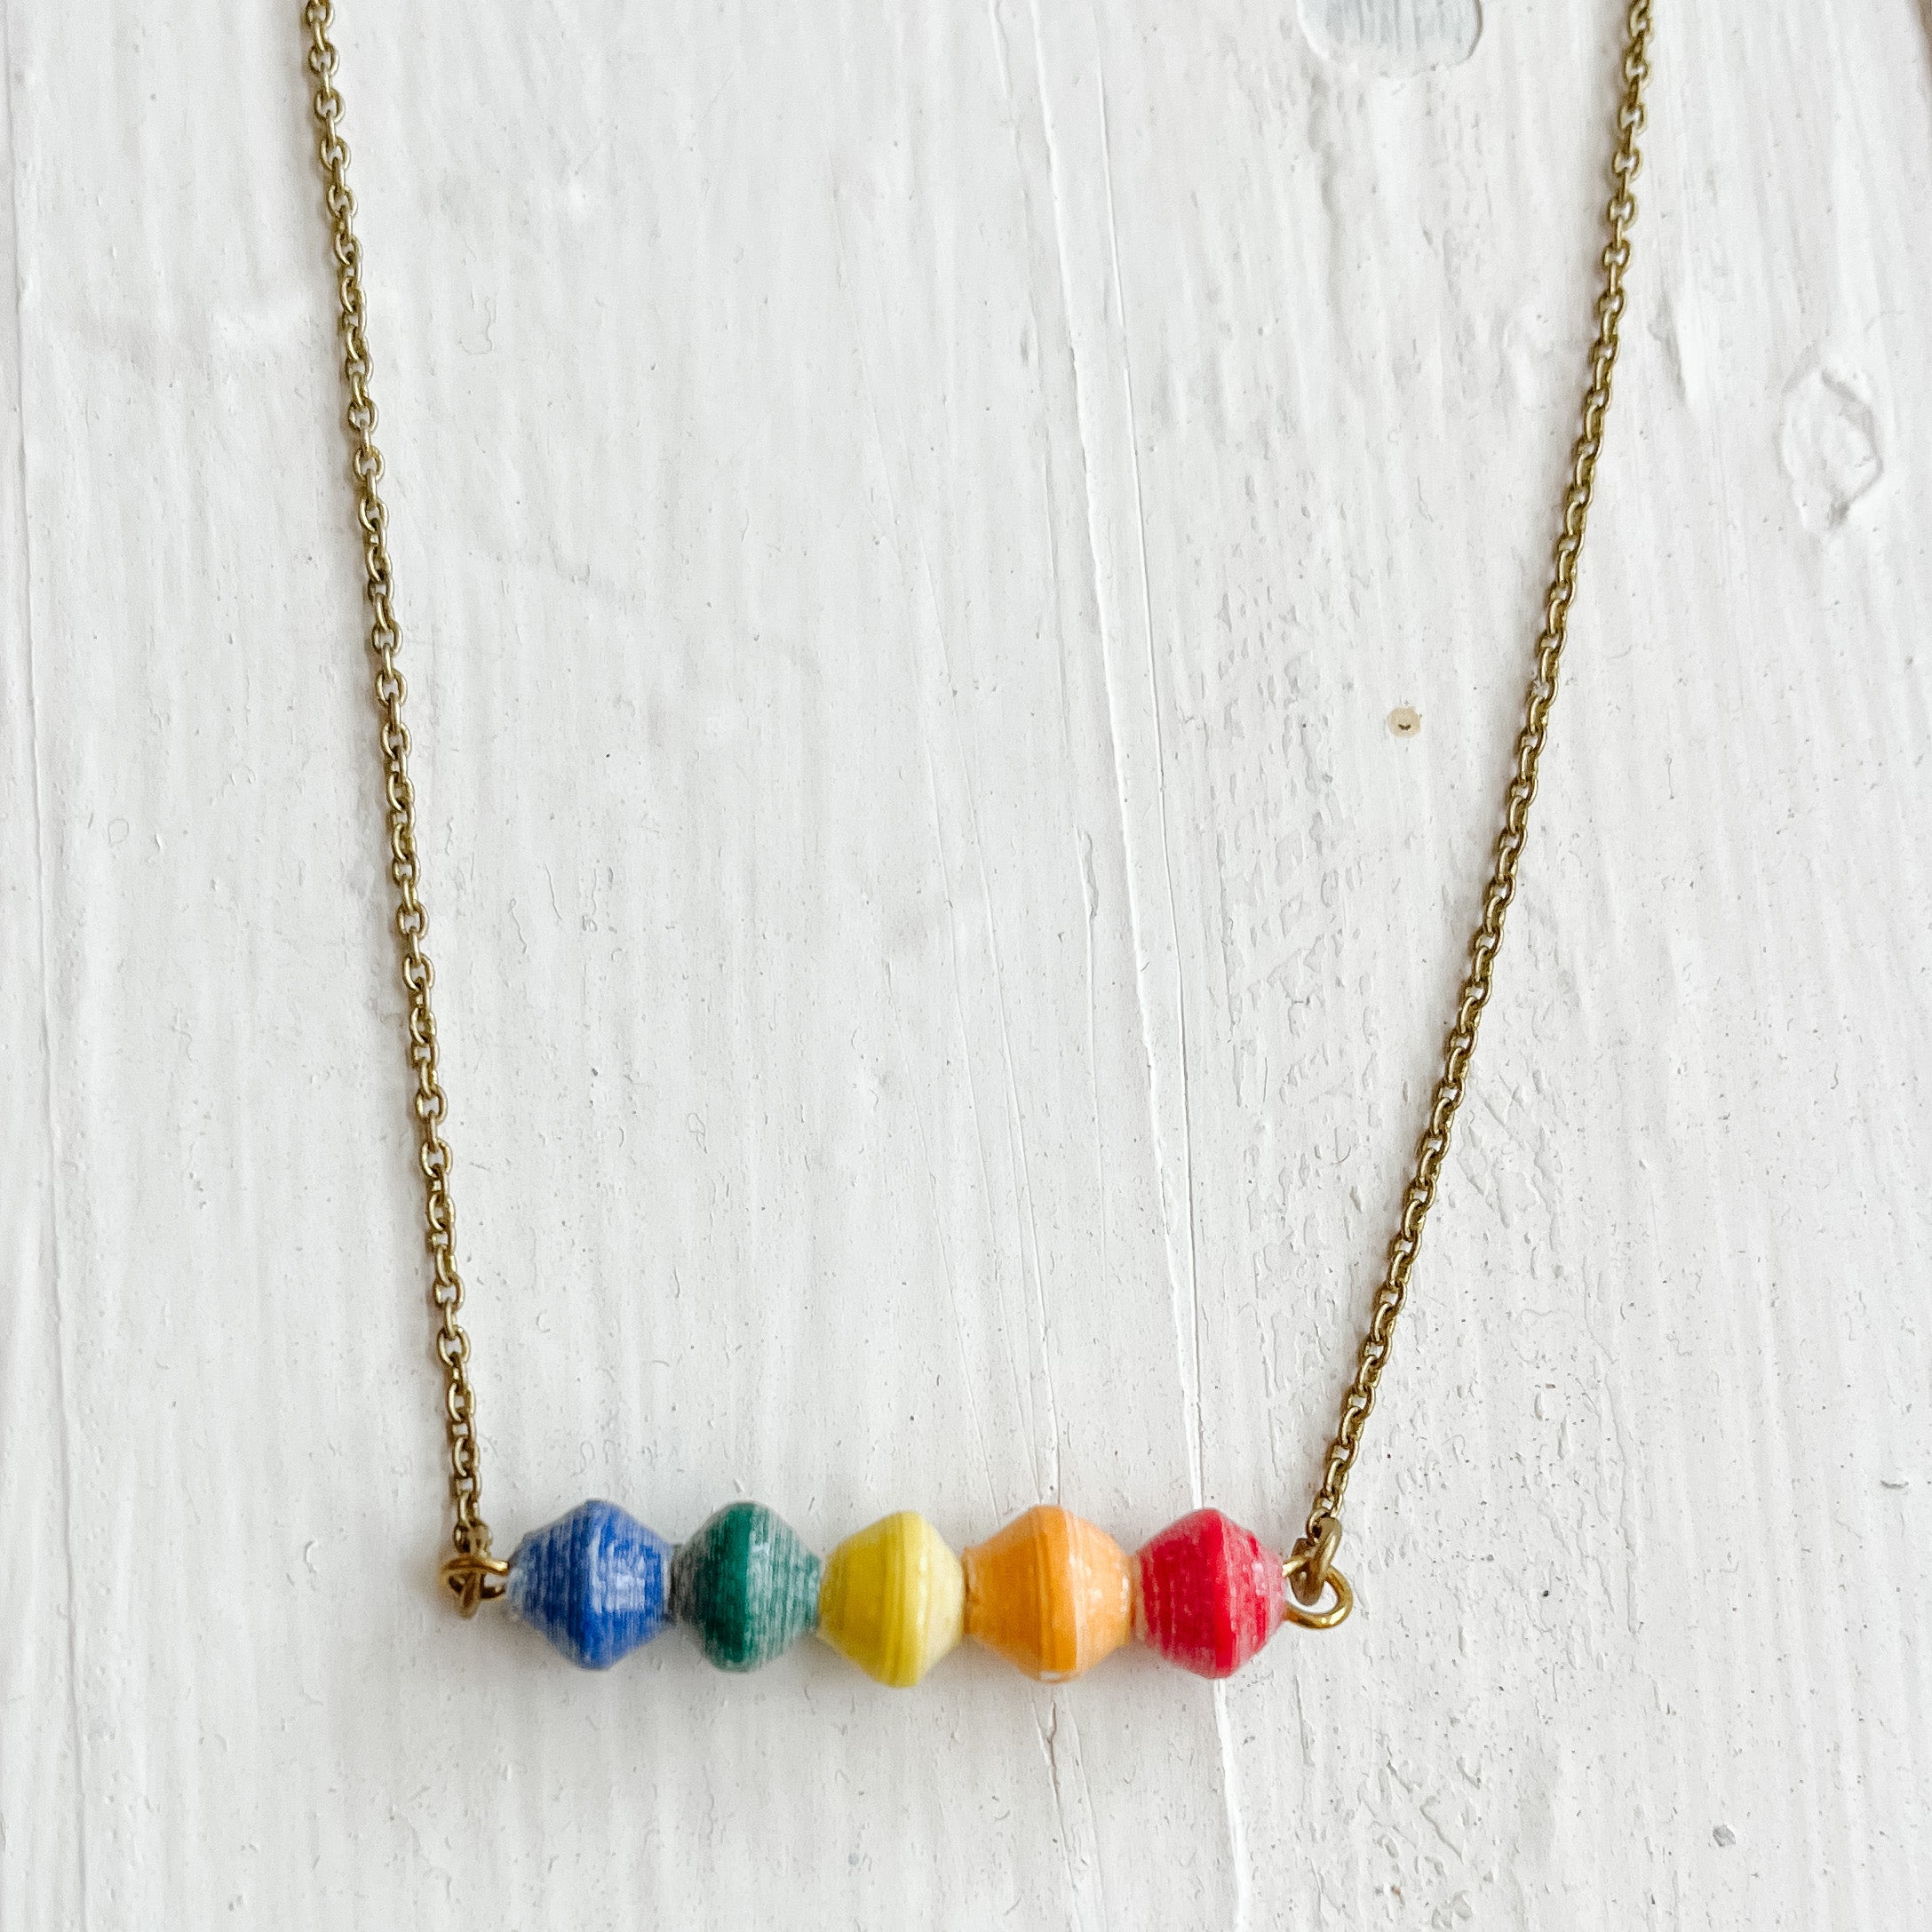 JustOne's thin necklace with five beads to make a rainbow handmade in Uganda